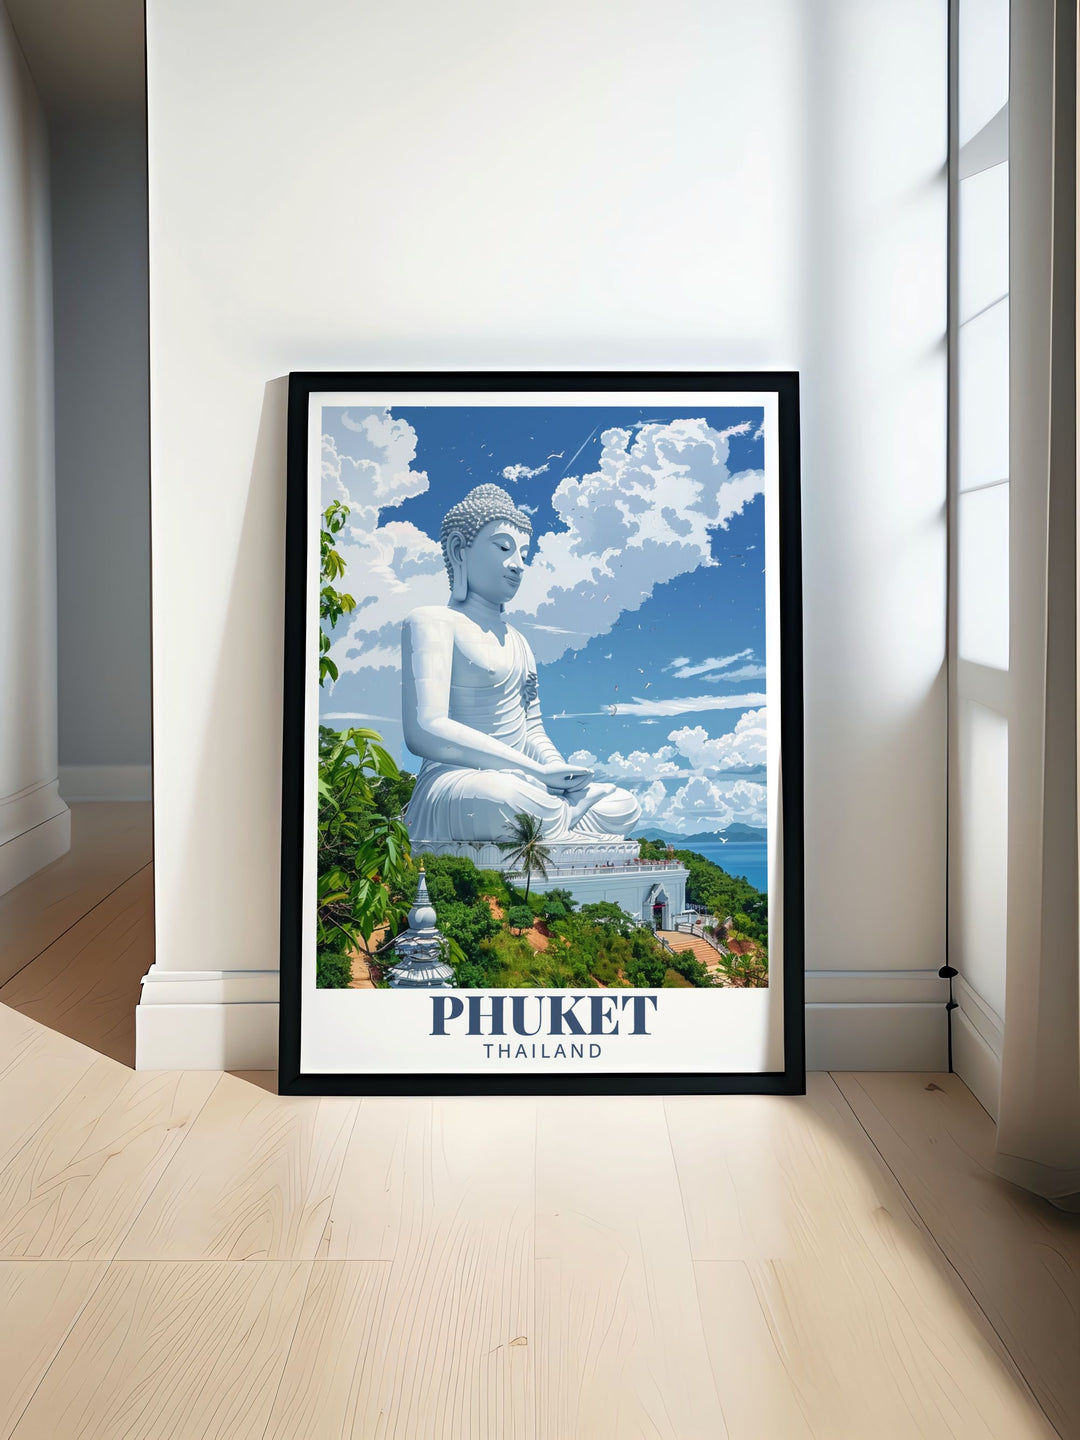 Thailand travel poster featuring the iconic Big Buddha with vibrant colors capturing the serene beauty of this majestic monument perfect for home decor and gift ideas showcasing the rich culture of Thailand